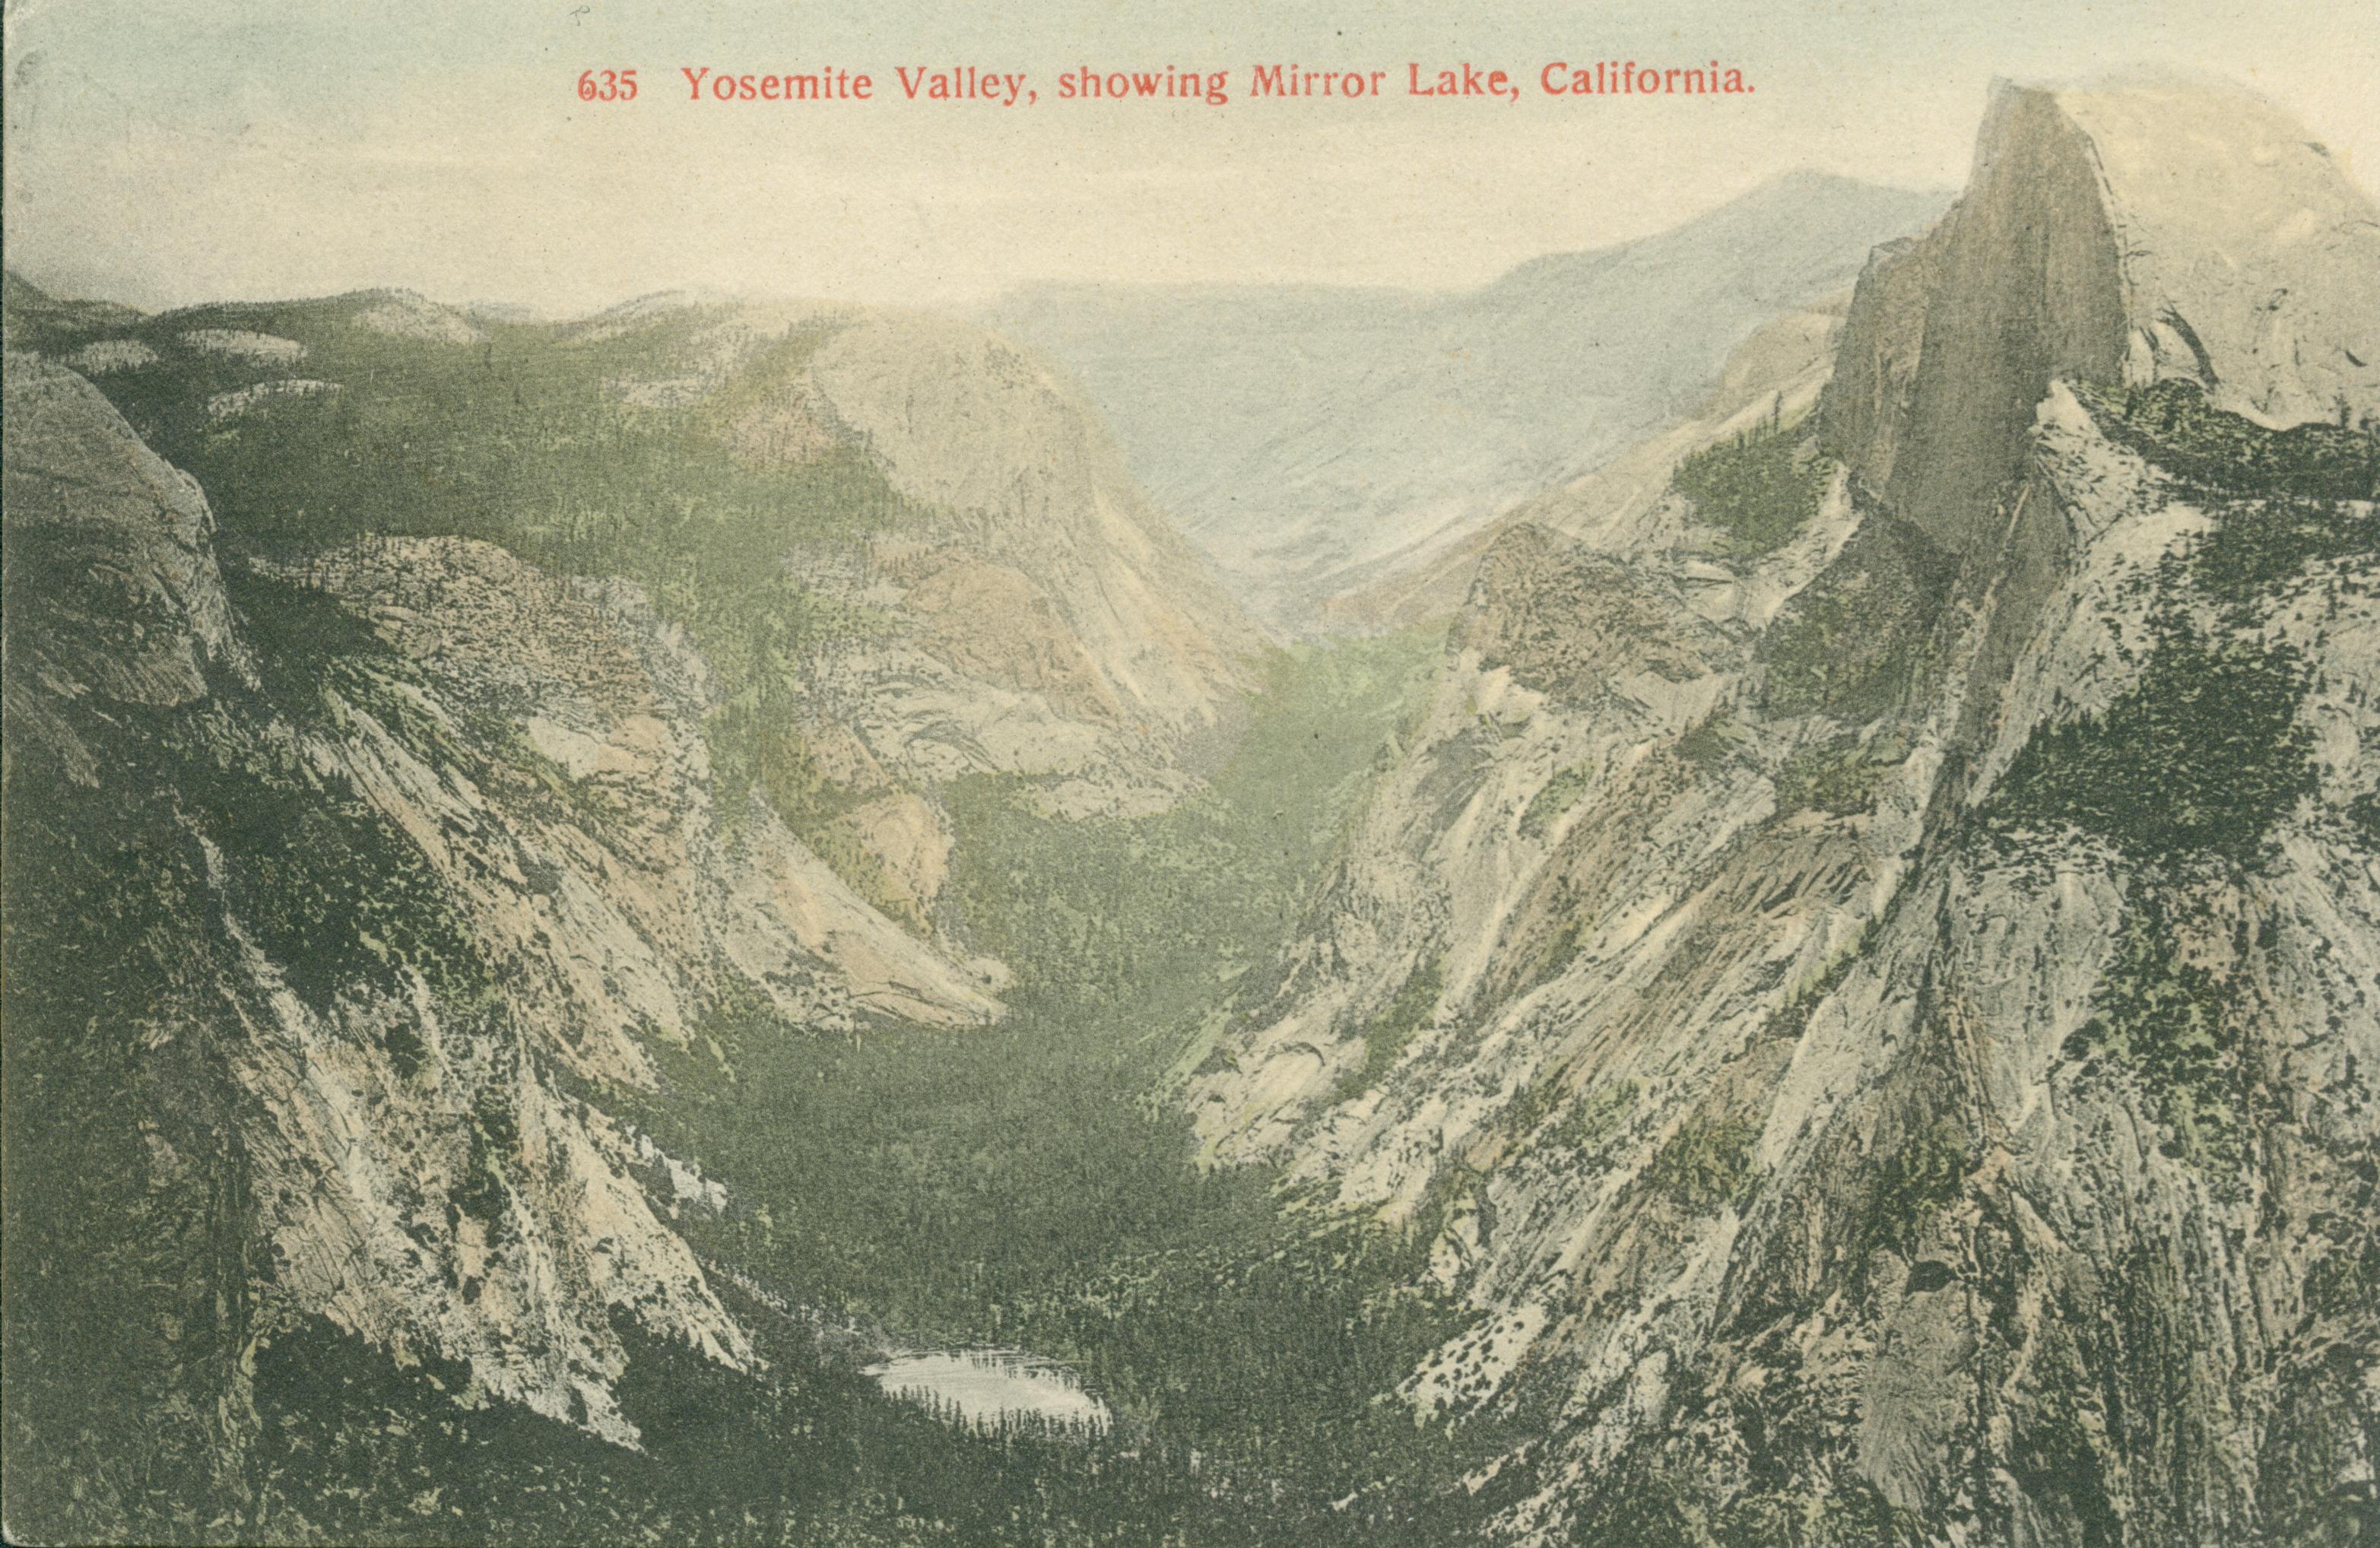 Shows a view of the Yosemite Valley, framed by the mountains, with Mirror Lake in the center